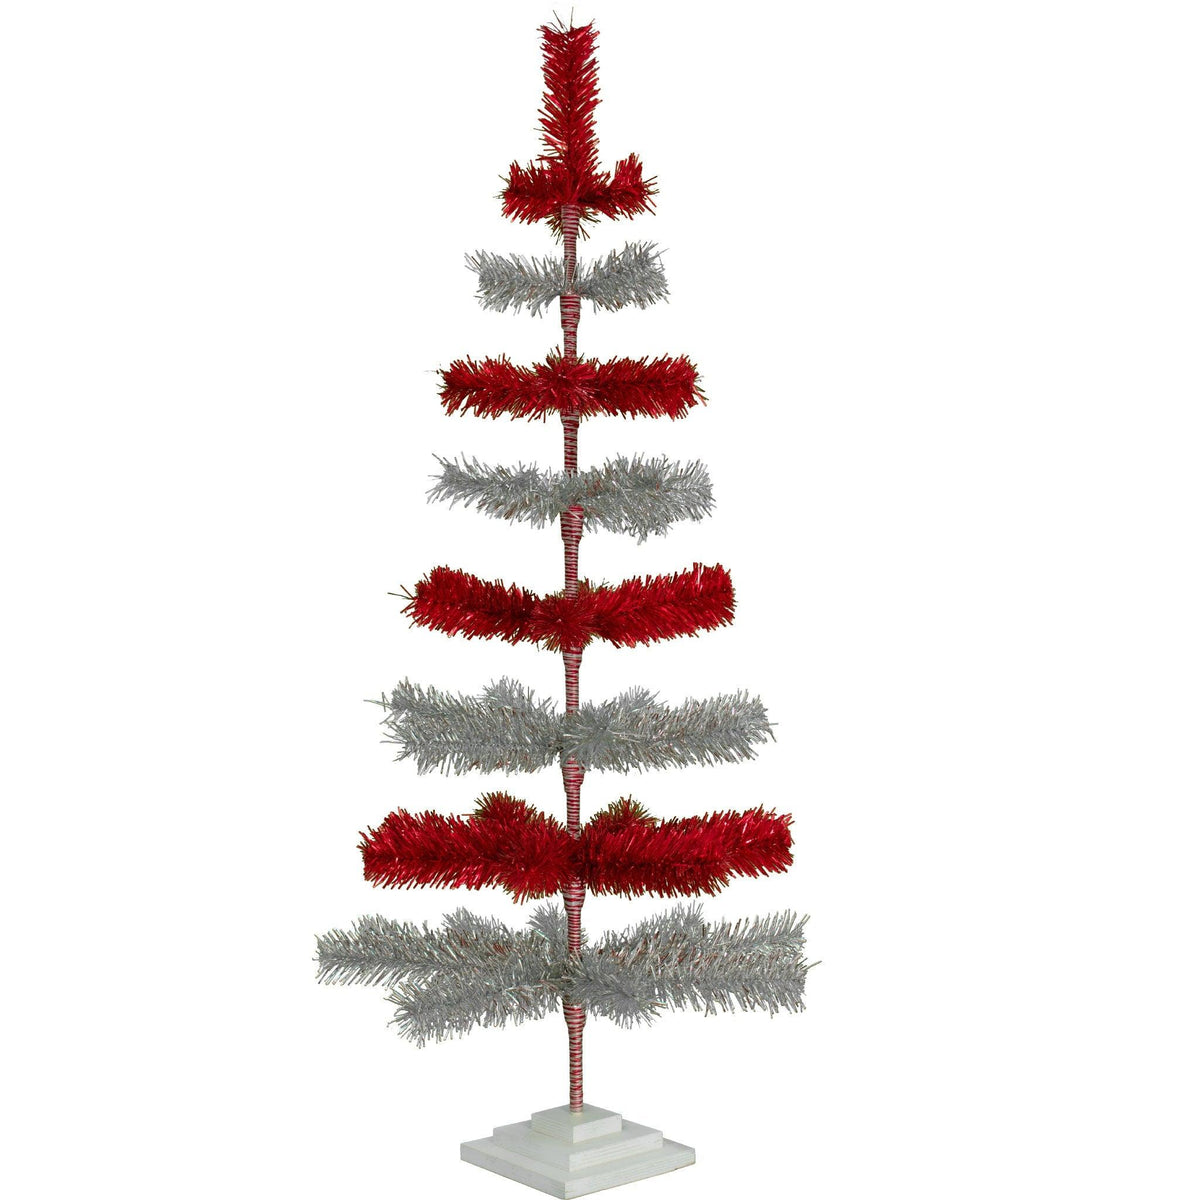 48in Tall Red & Silver Layered Tinsel Christmas Trees! Decorate for the holidays with a Shiny Red and Metallic Silver retro-style Christmas Tree. On sale now at leedisplay.com